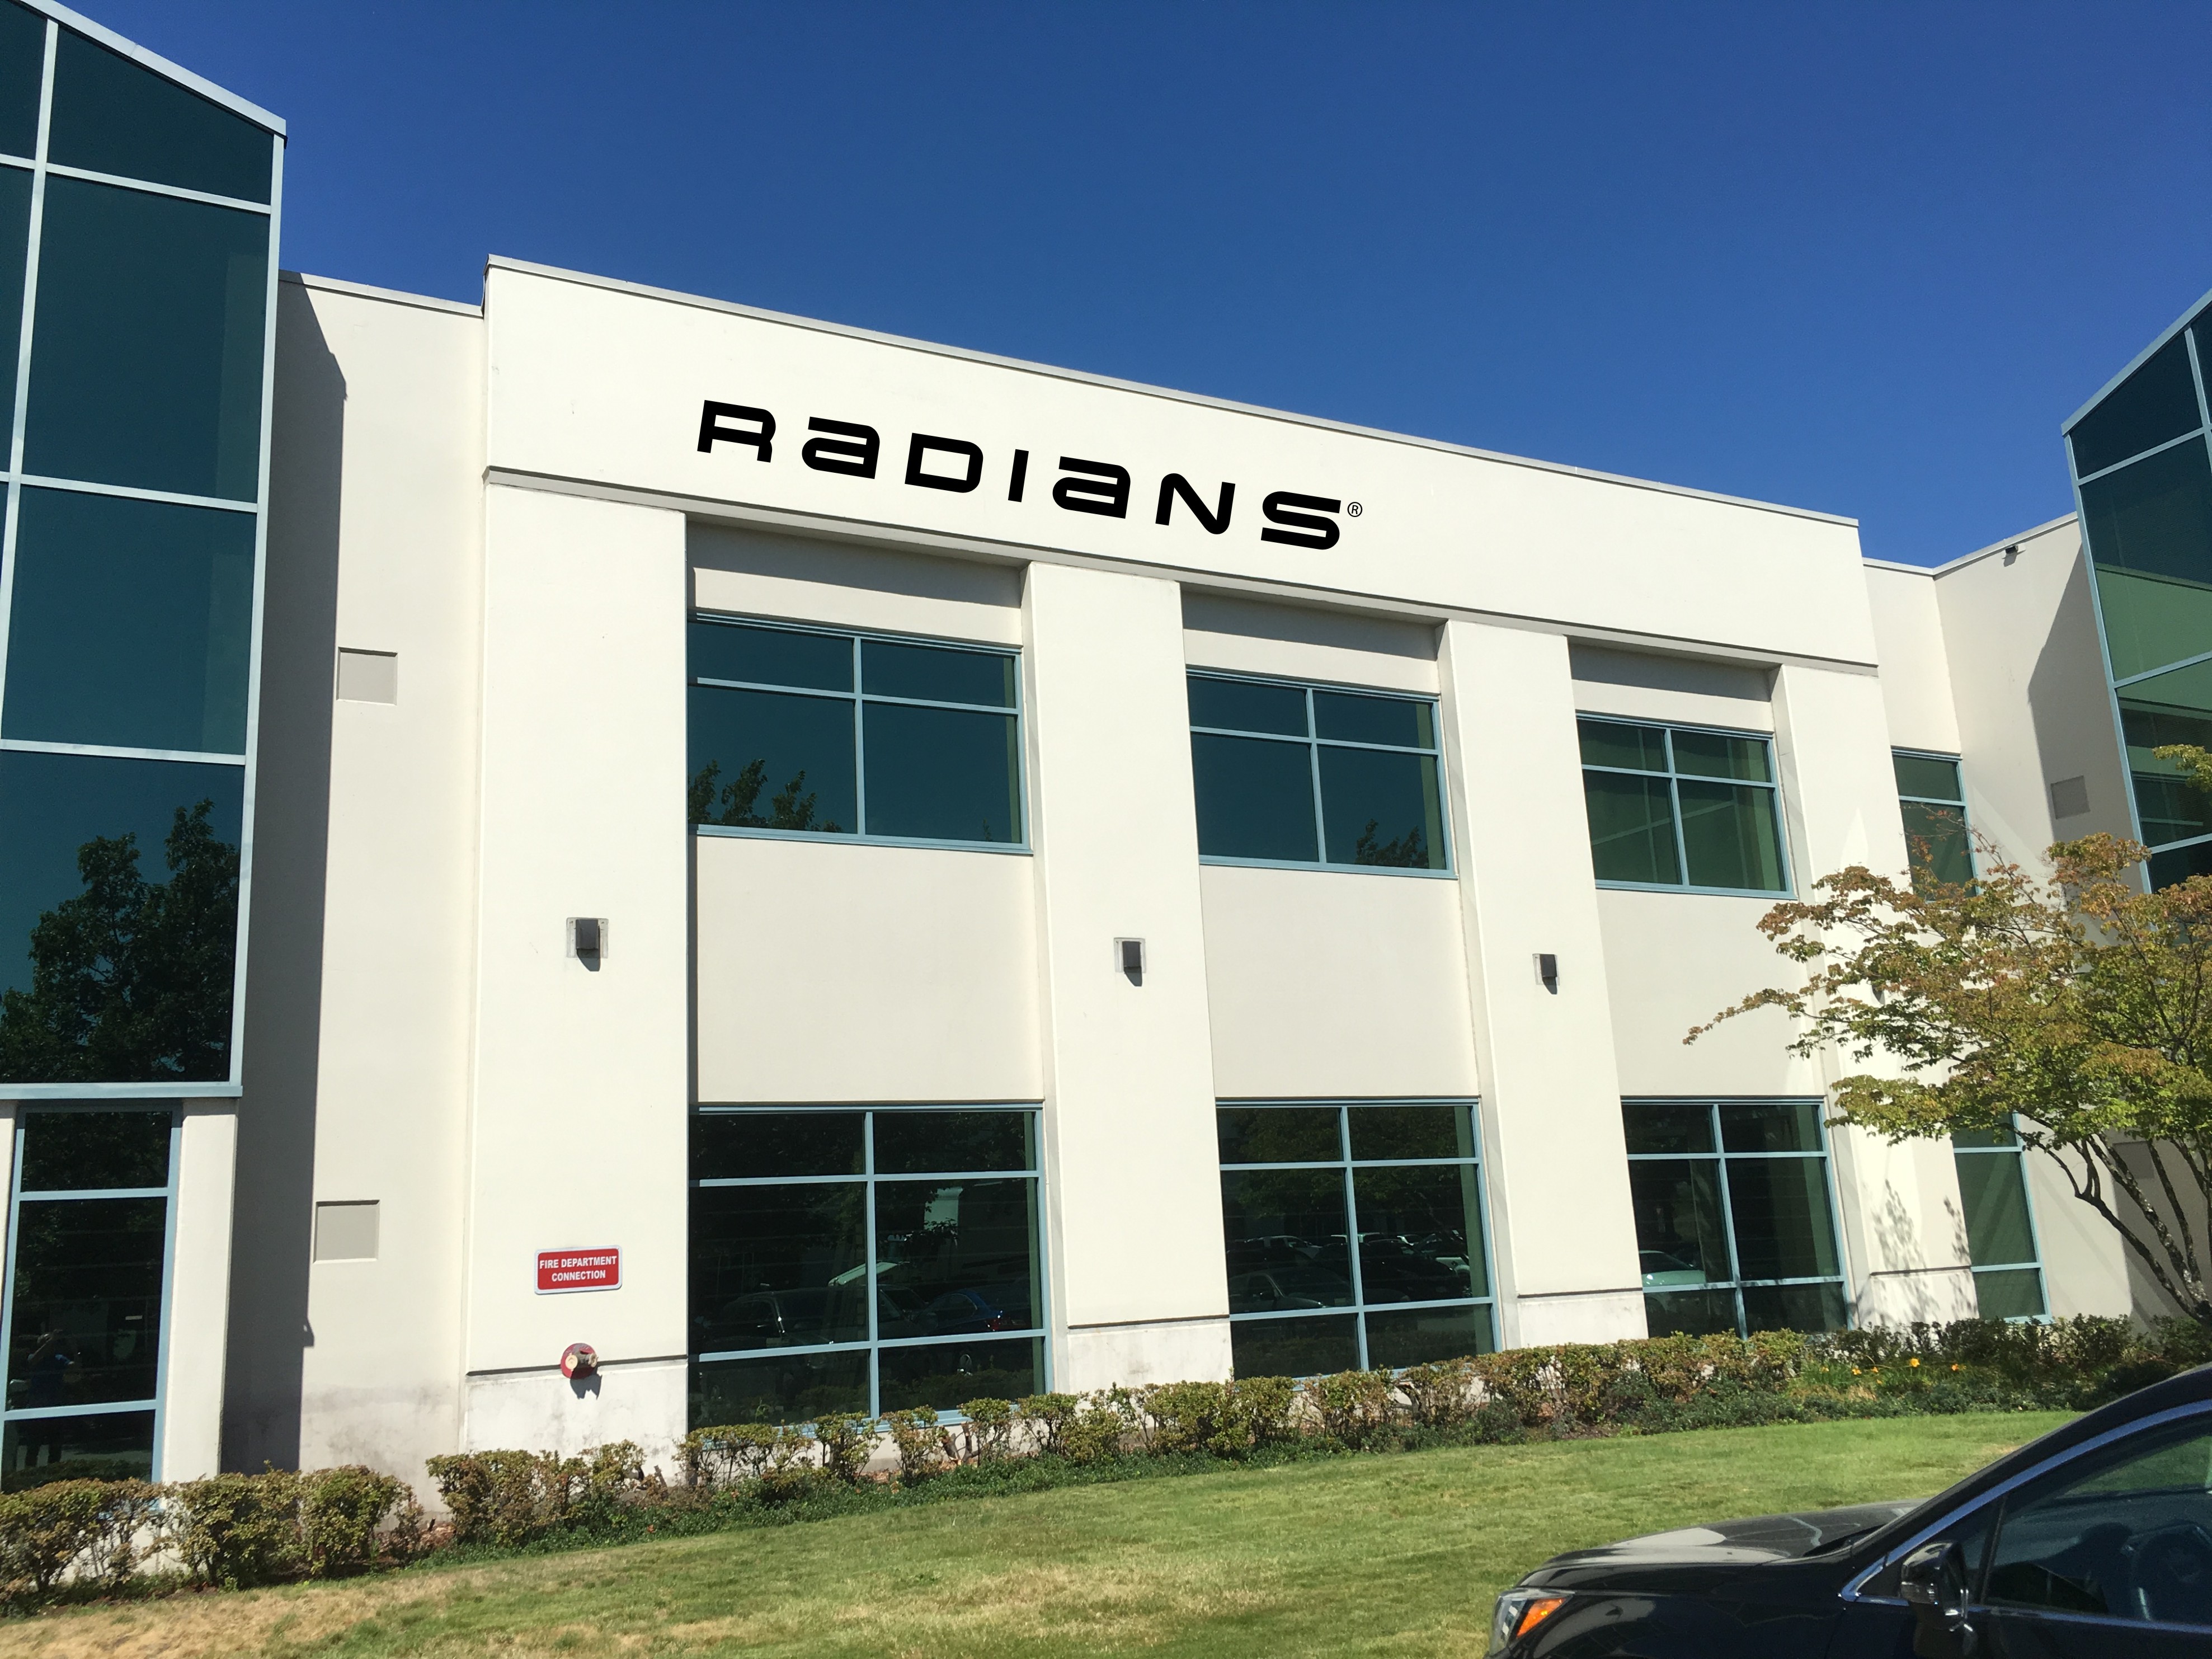 Radians is pleased to announce the opening of its new Canadian distribution center in British Columbia.